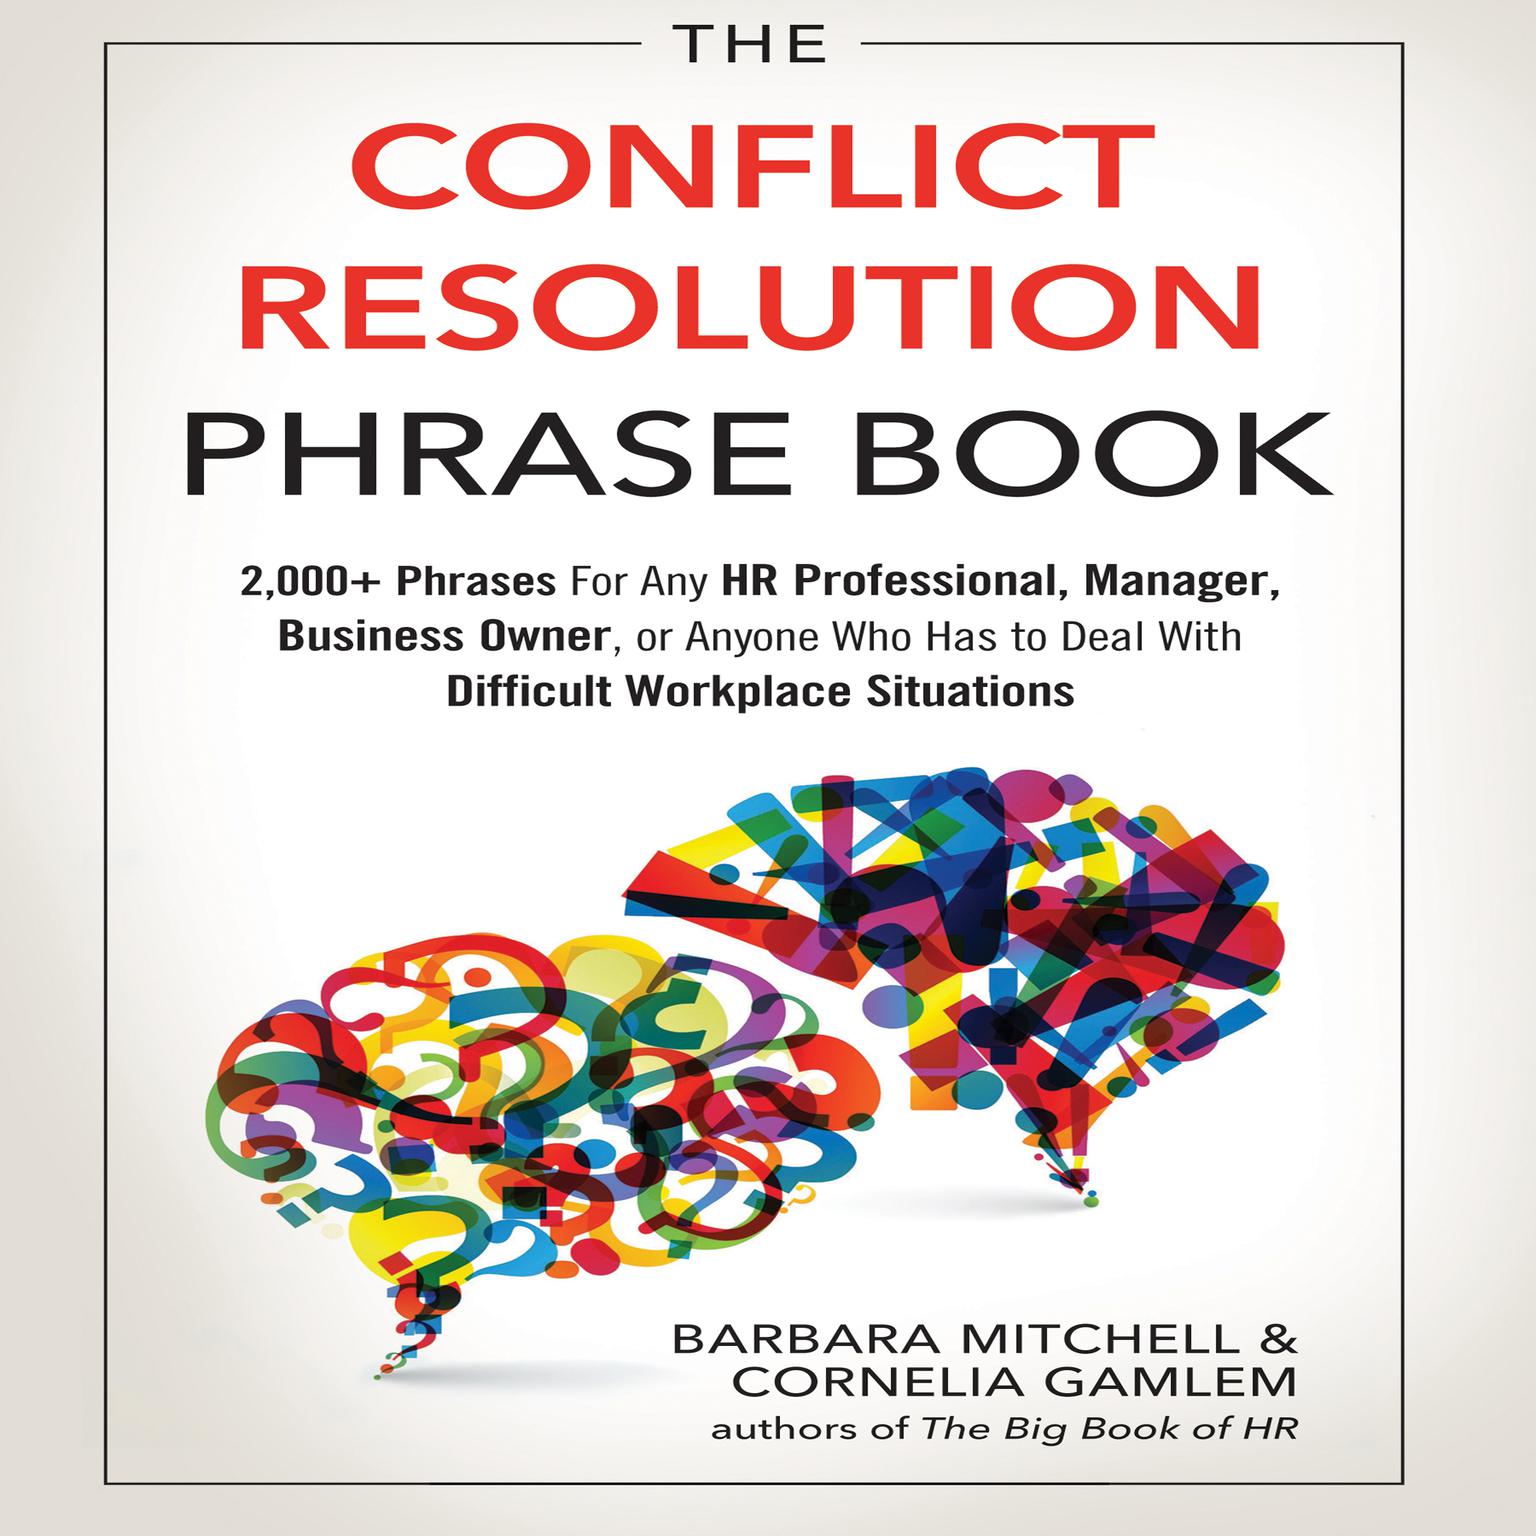 The Conflict Resolution Phrase Book: 2,000+ Phrases For Any HR Professional, Manager, Business Owner, or Anyone Who Has to Deal with Difficult Workplace Situations Audiobook, by Barbara Mitchell